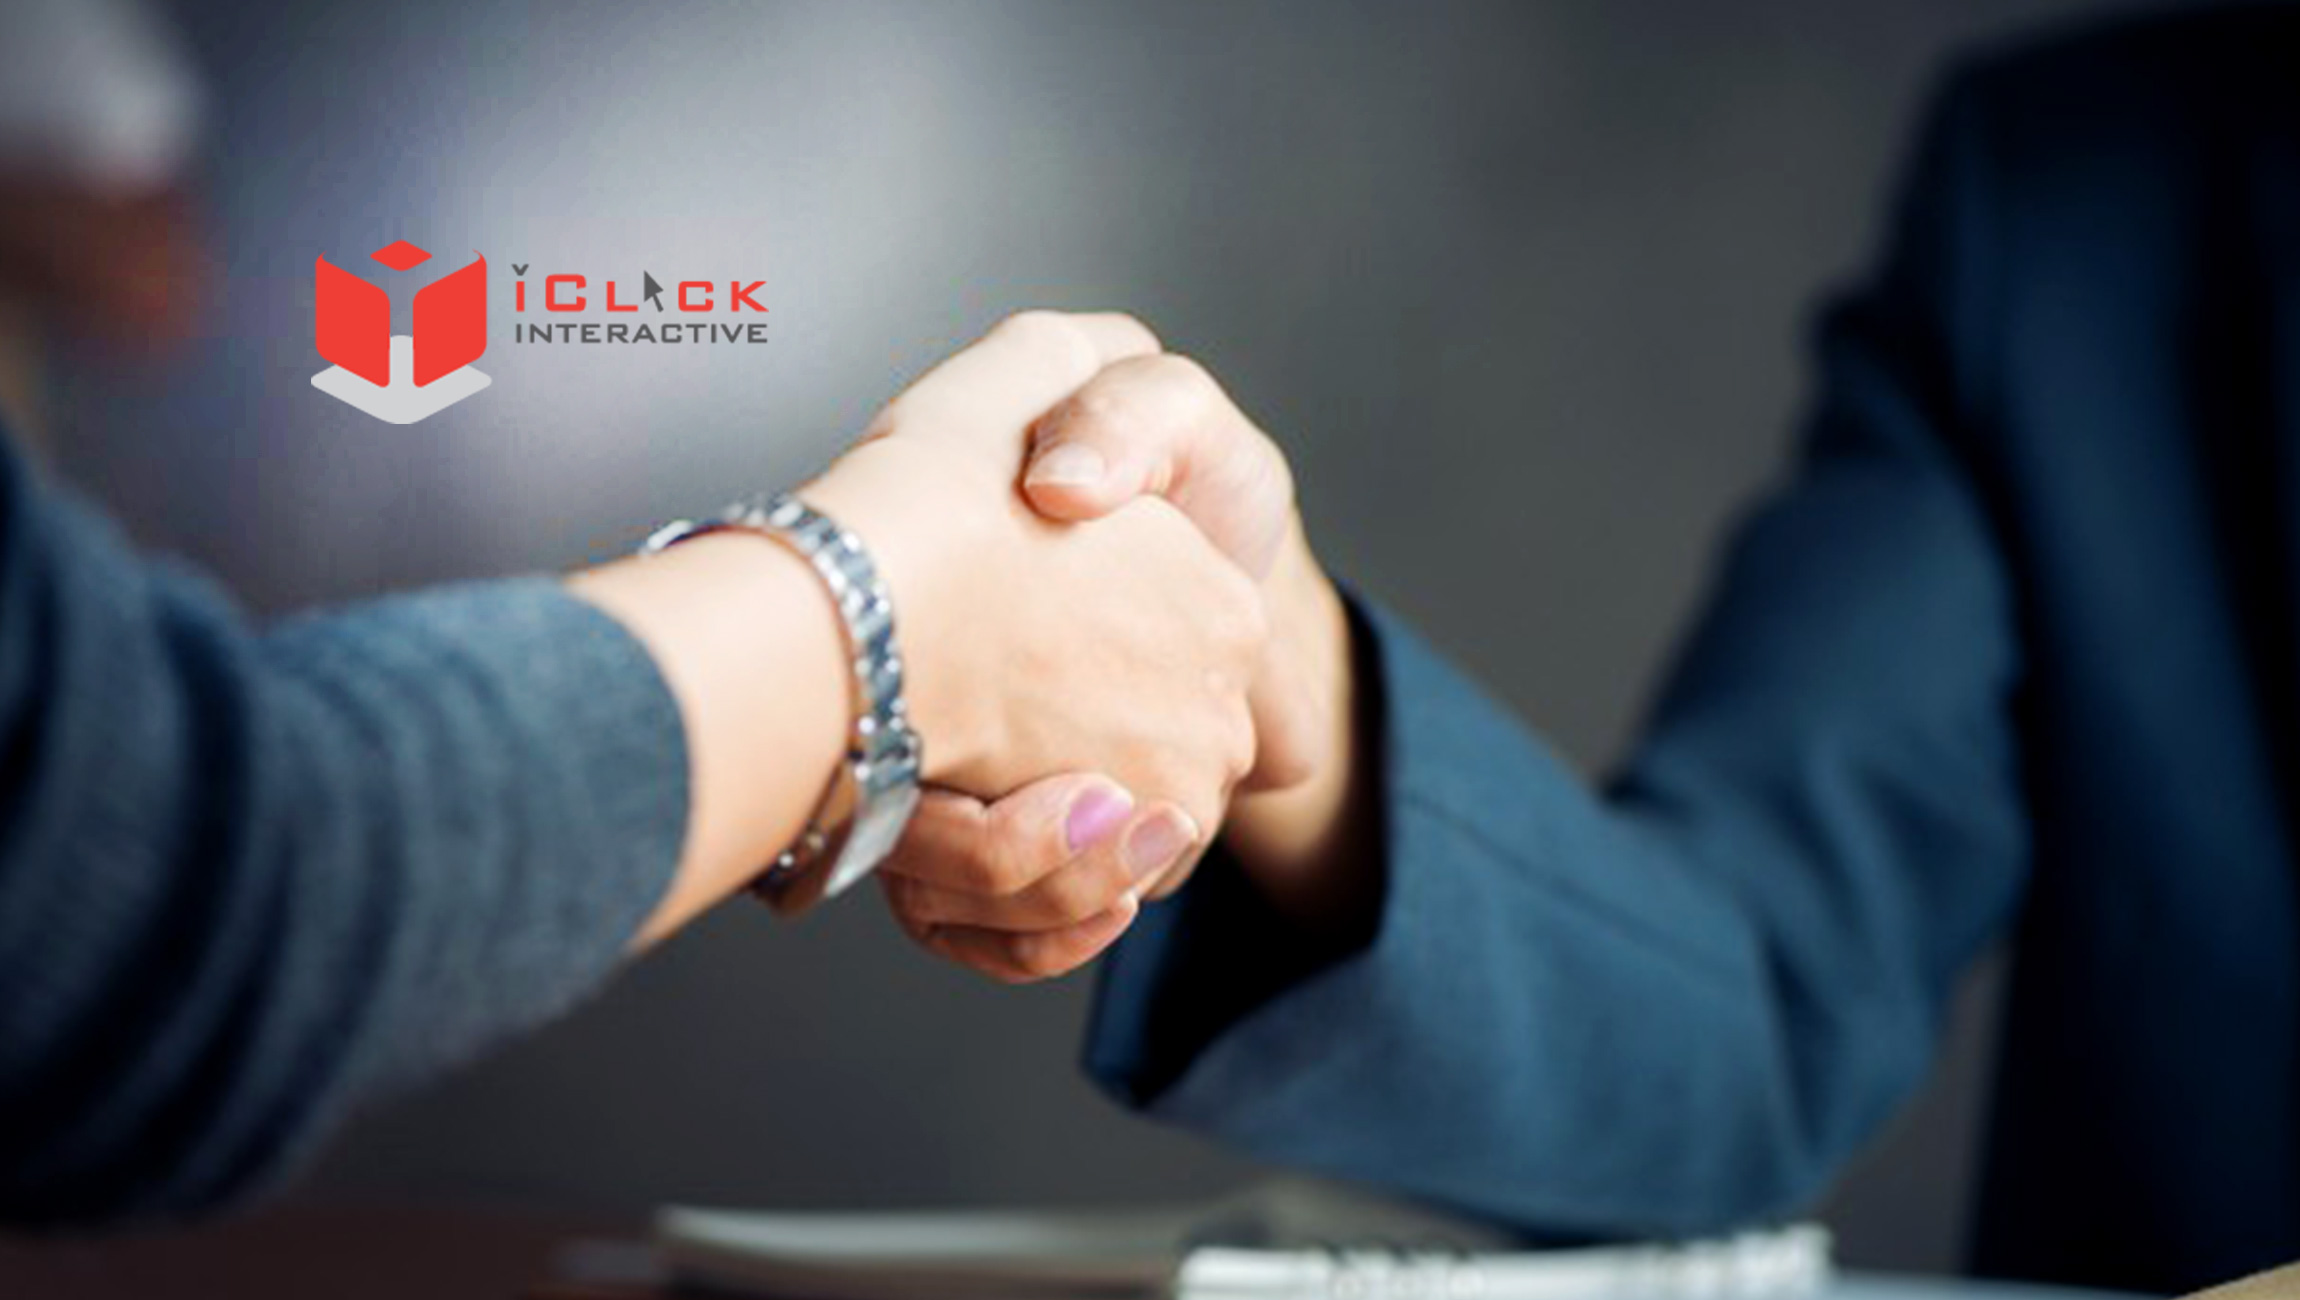 KLWTT and iClick to offer Marketing-as-a-Service through Collaboration with Oracle Advertising and Customer Experience (CX)